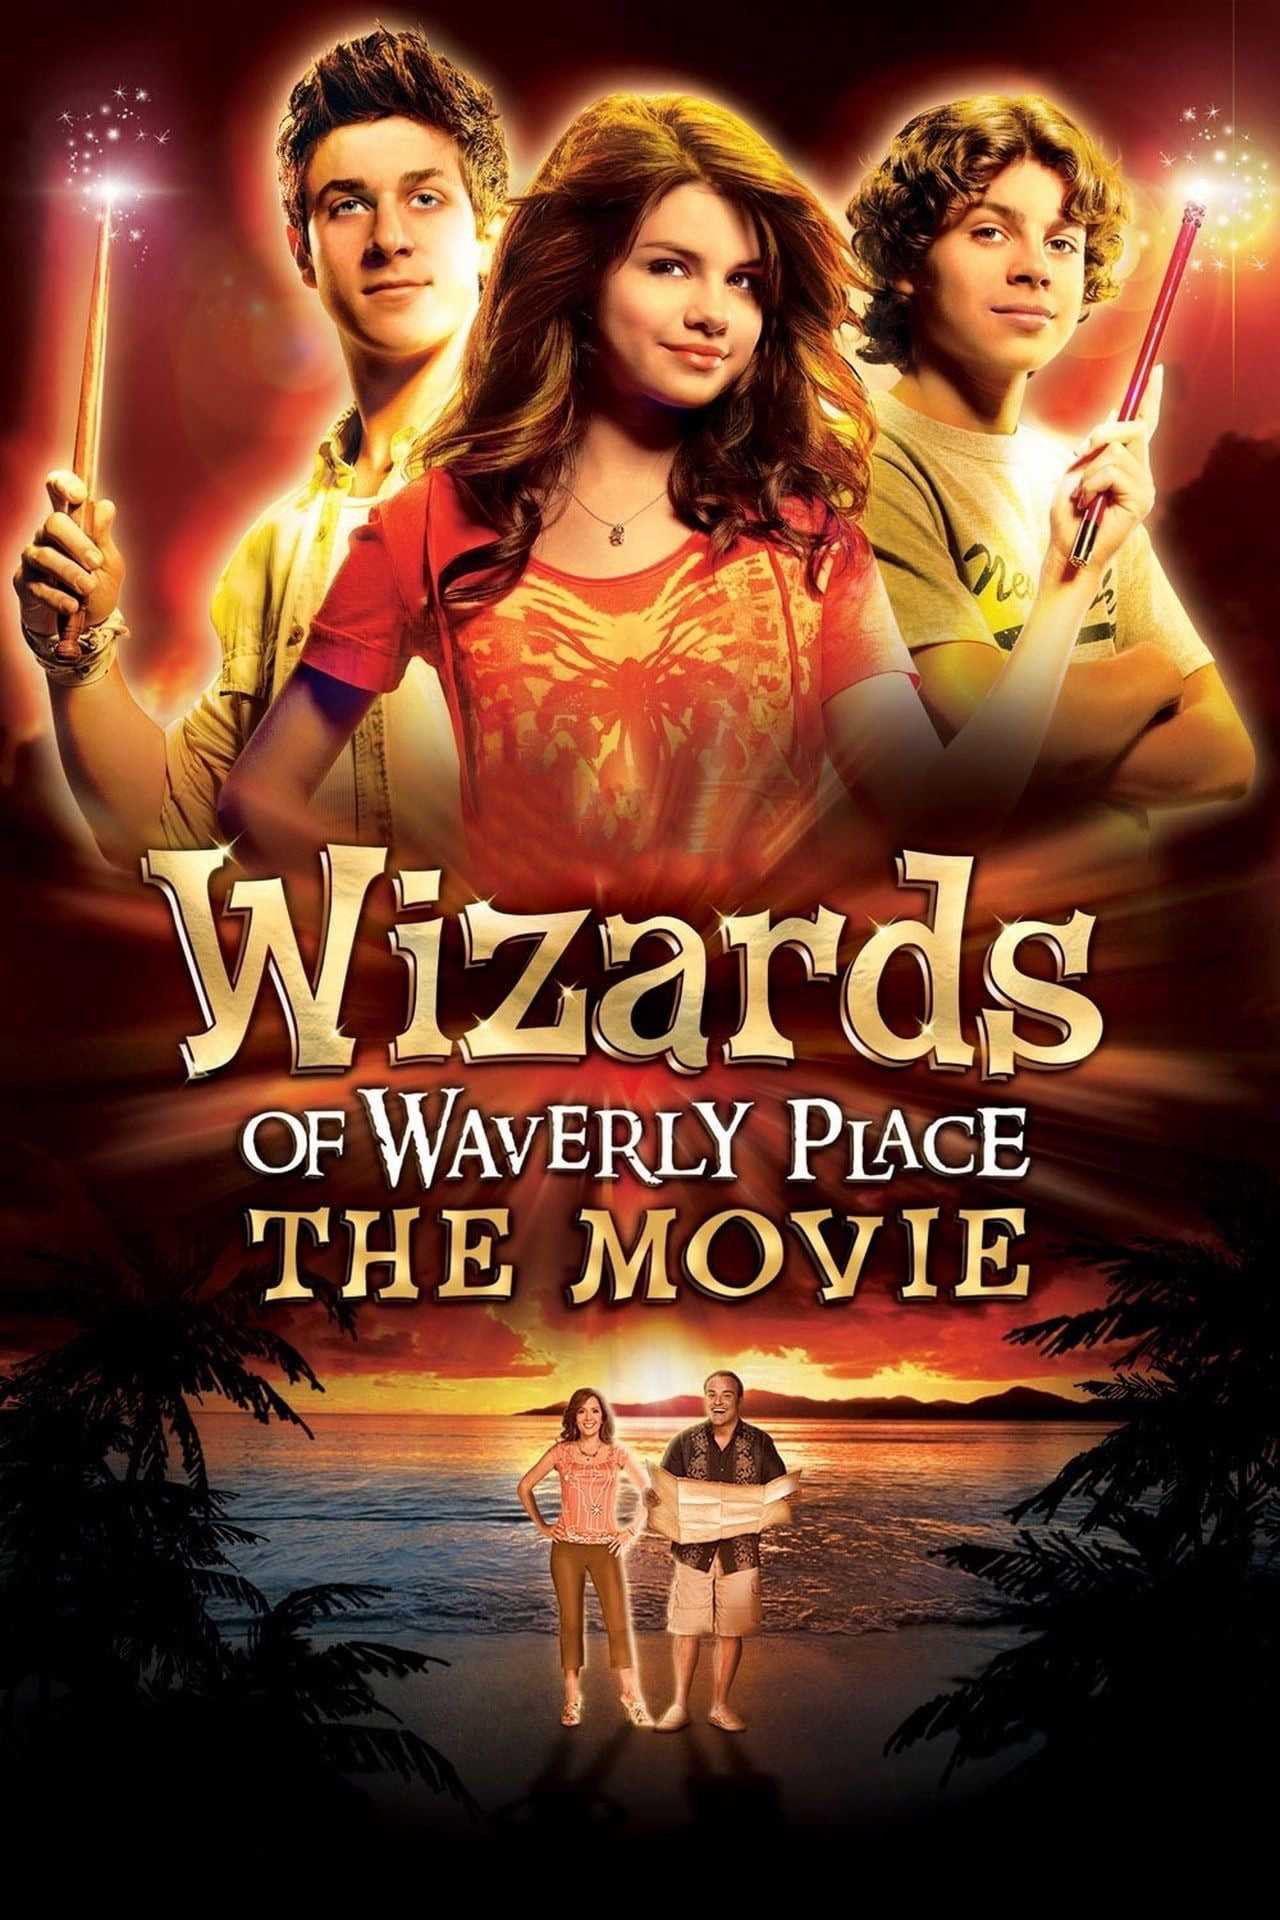 Phù thuỷ xứ waverly - Wizards of waverly place: the movie